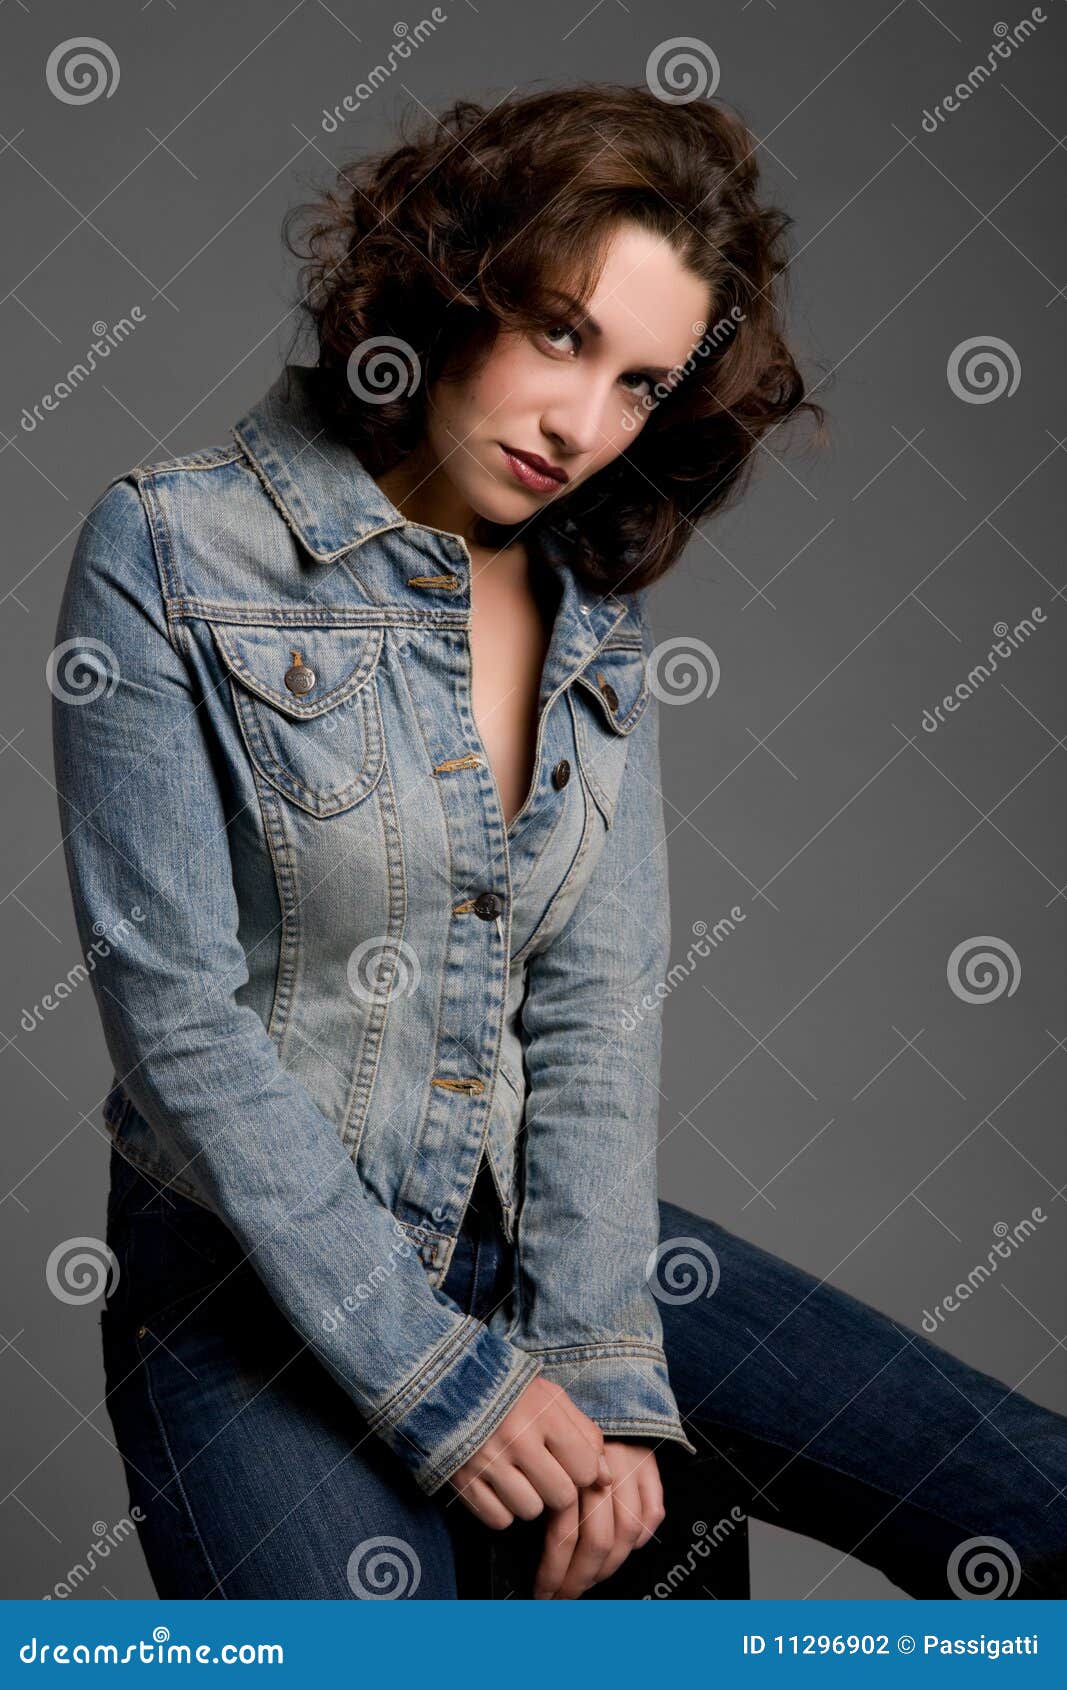 Jeans stock photo. Image of jeans, glamour, long, freshness - 11296902